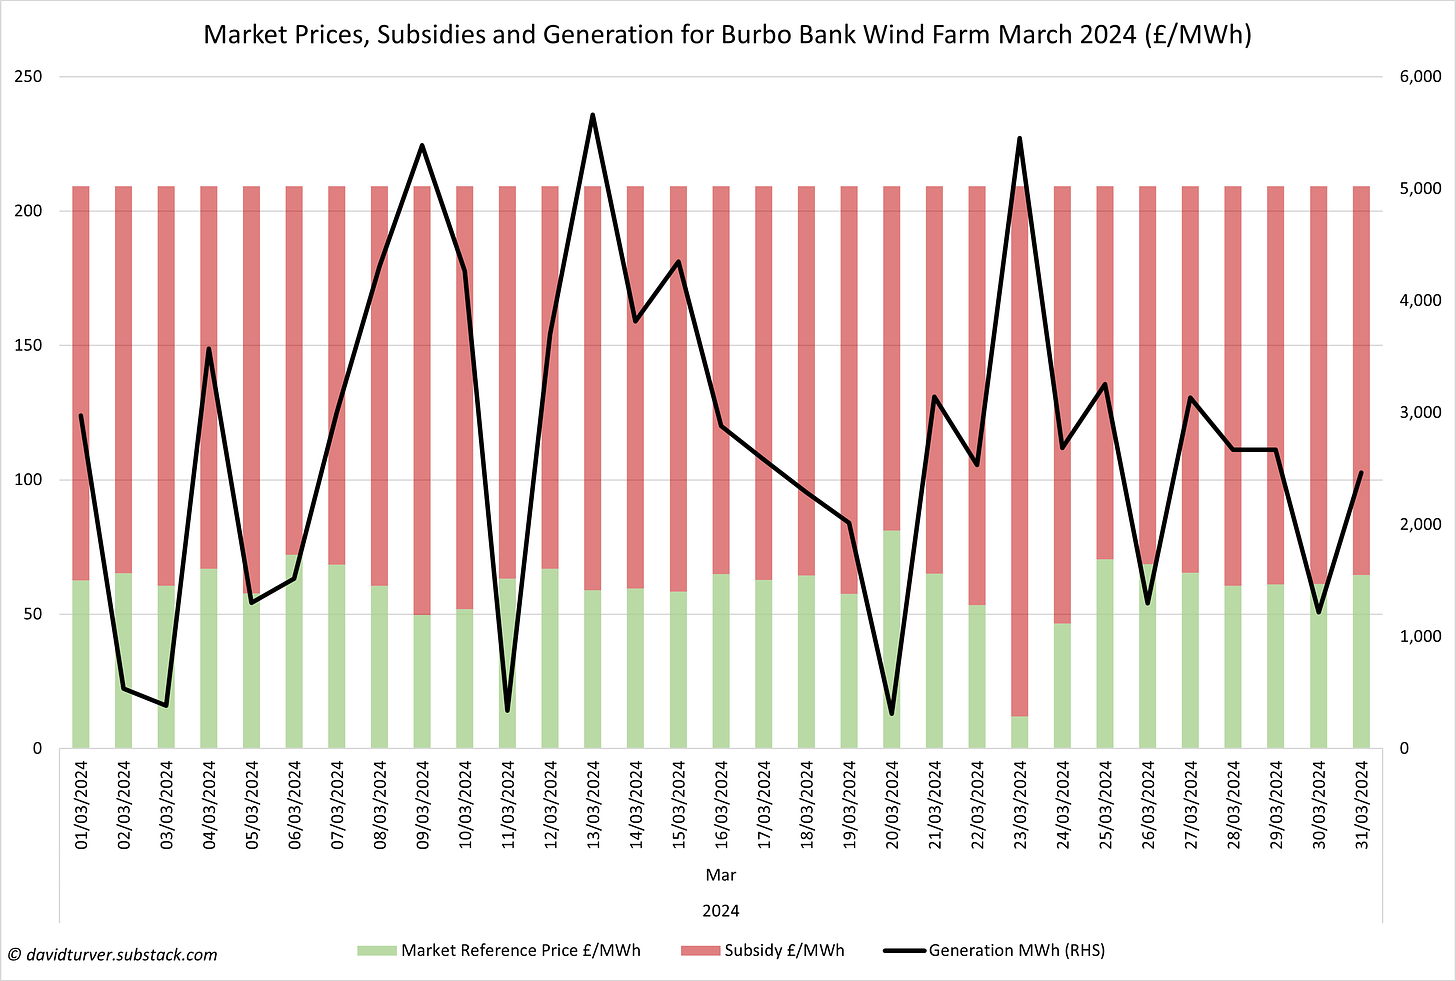 Figure 3 - Market Price Subsidy and Generation for Burbo Bank WInd Farm March 2024 (£ per MWh)